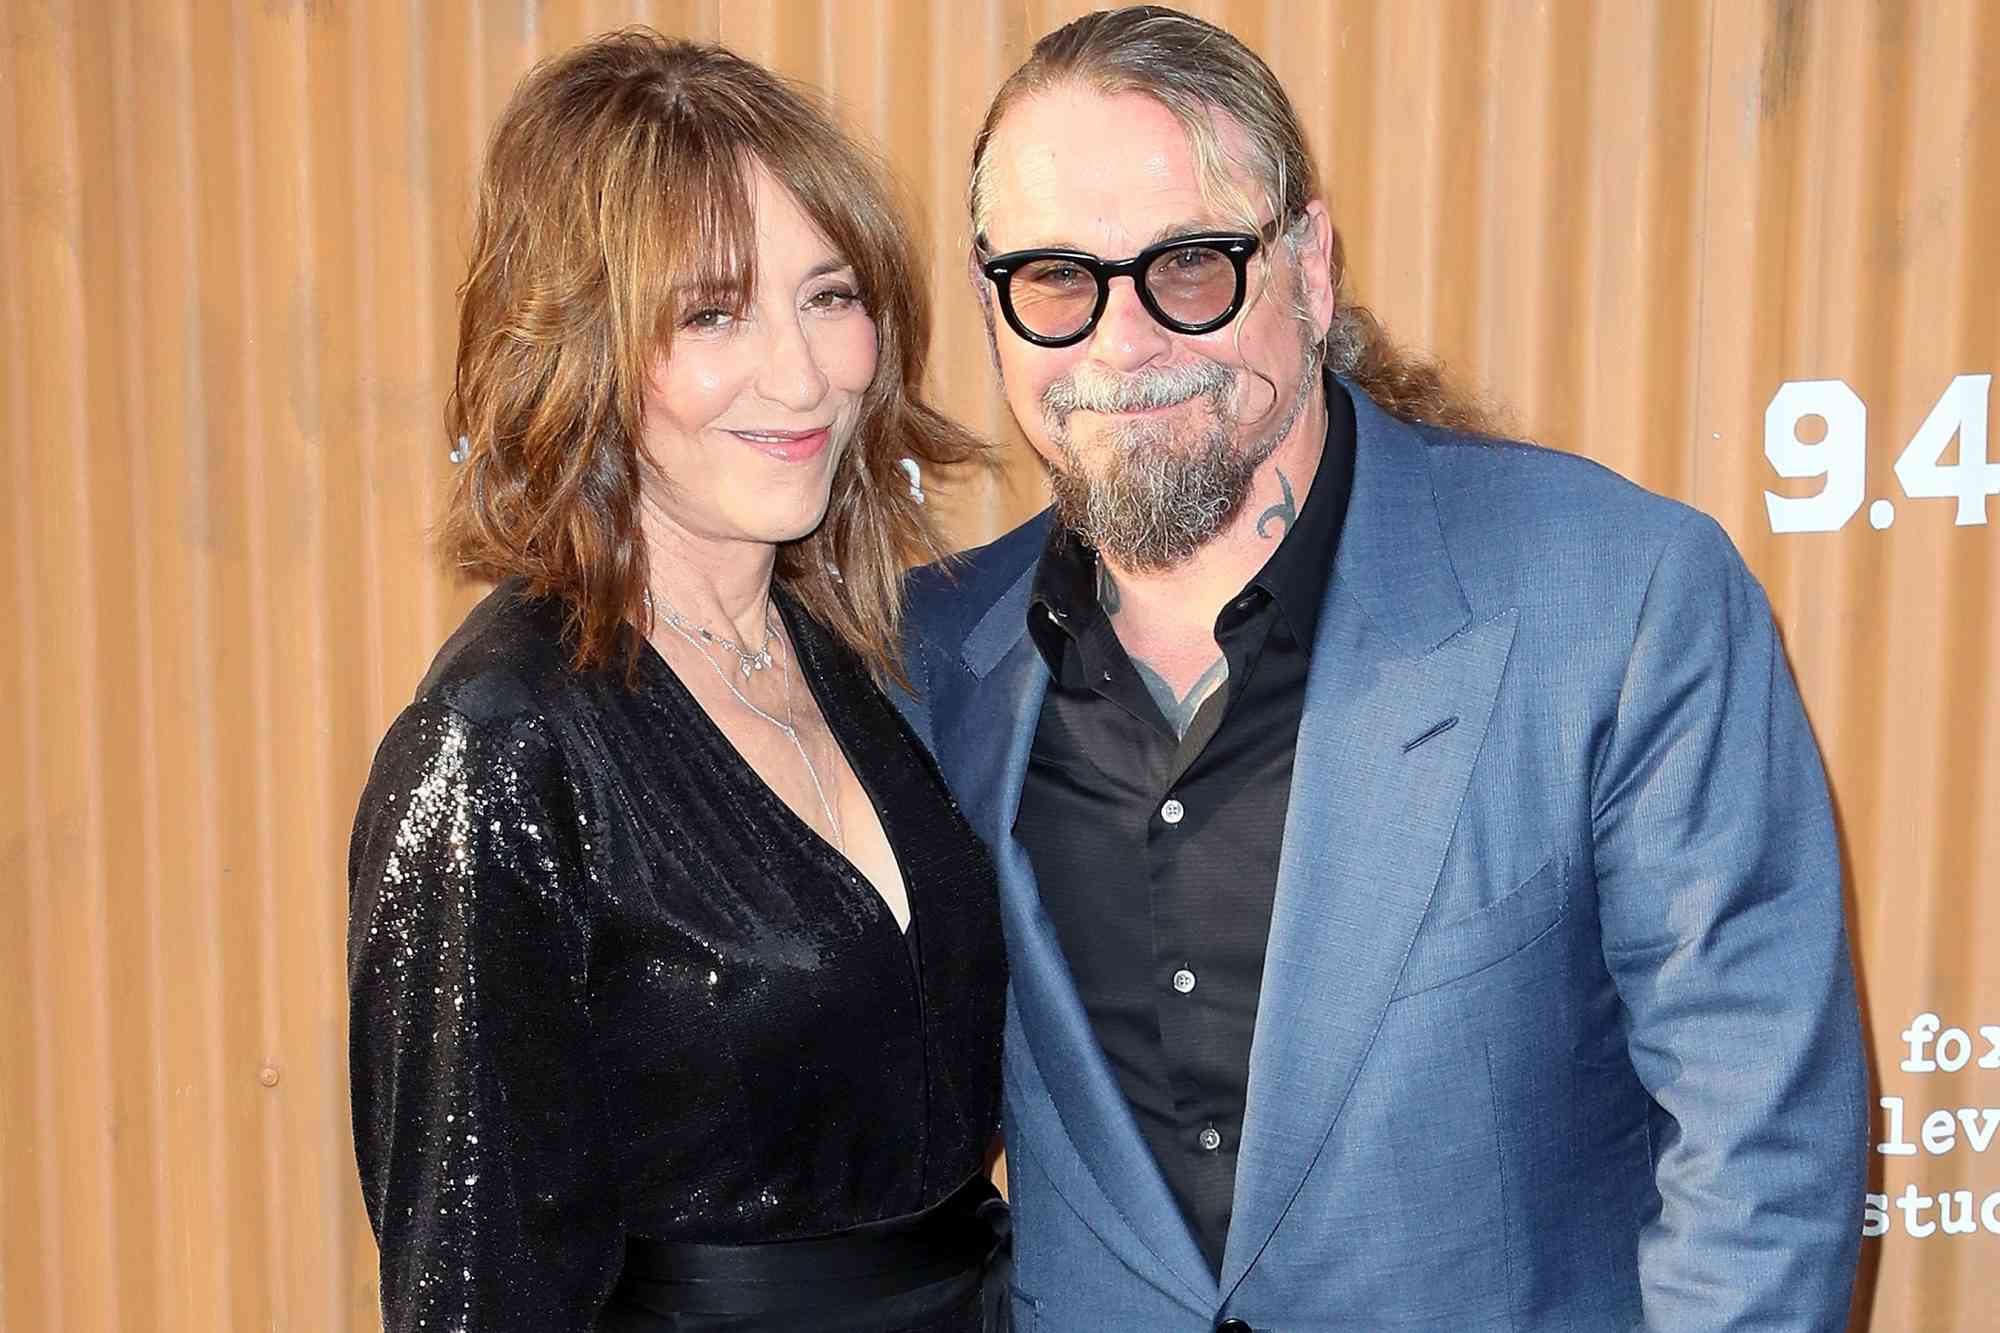 How Katey Sagal and Kurt Sutter Kept Their Marriage Intact Working Together on “Sons of Anarchy”: We Needed 'Boundaries'